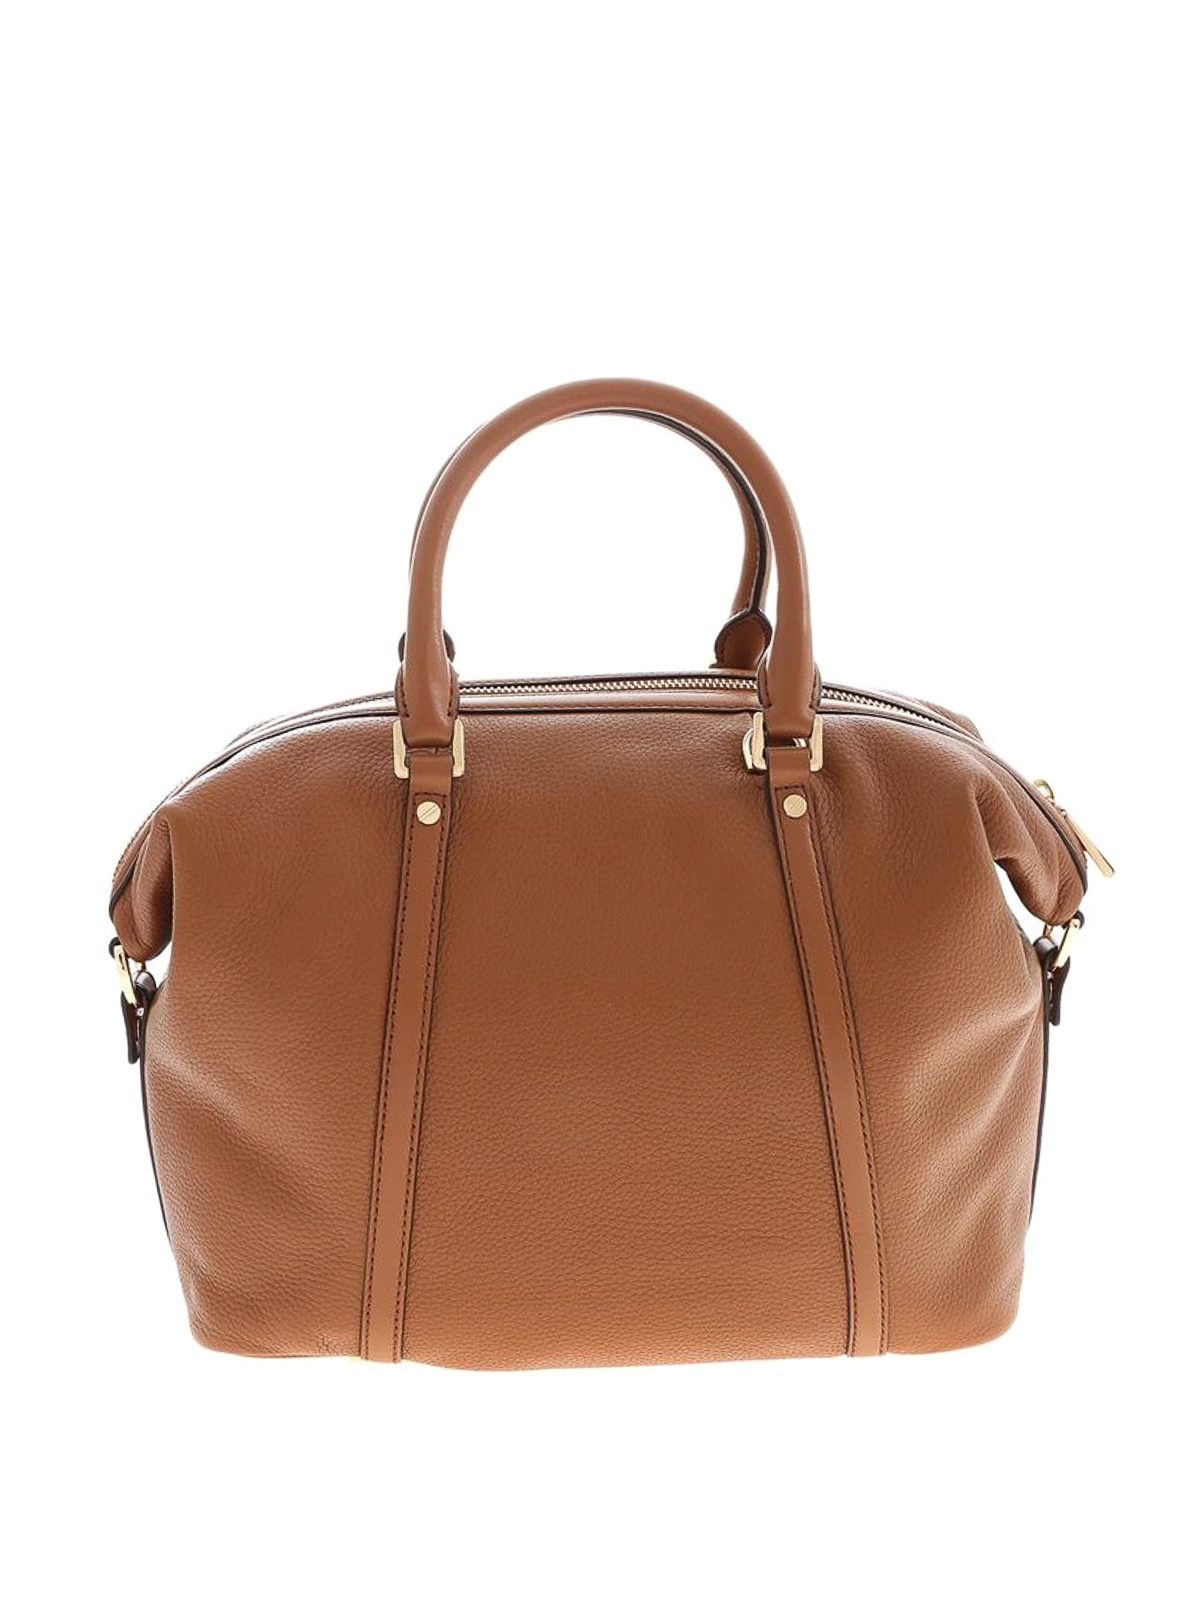 Bedford Legacy Michael Michael Kors bag in grained leather